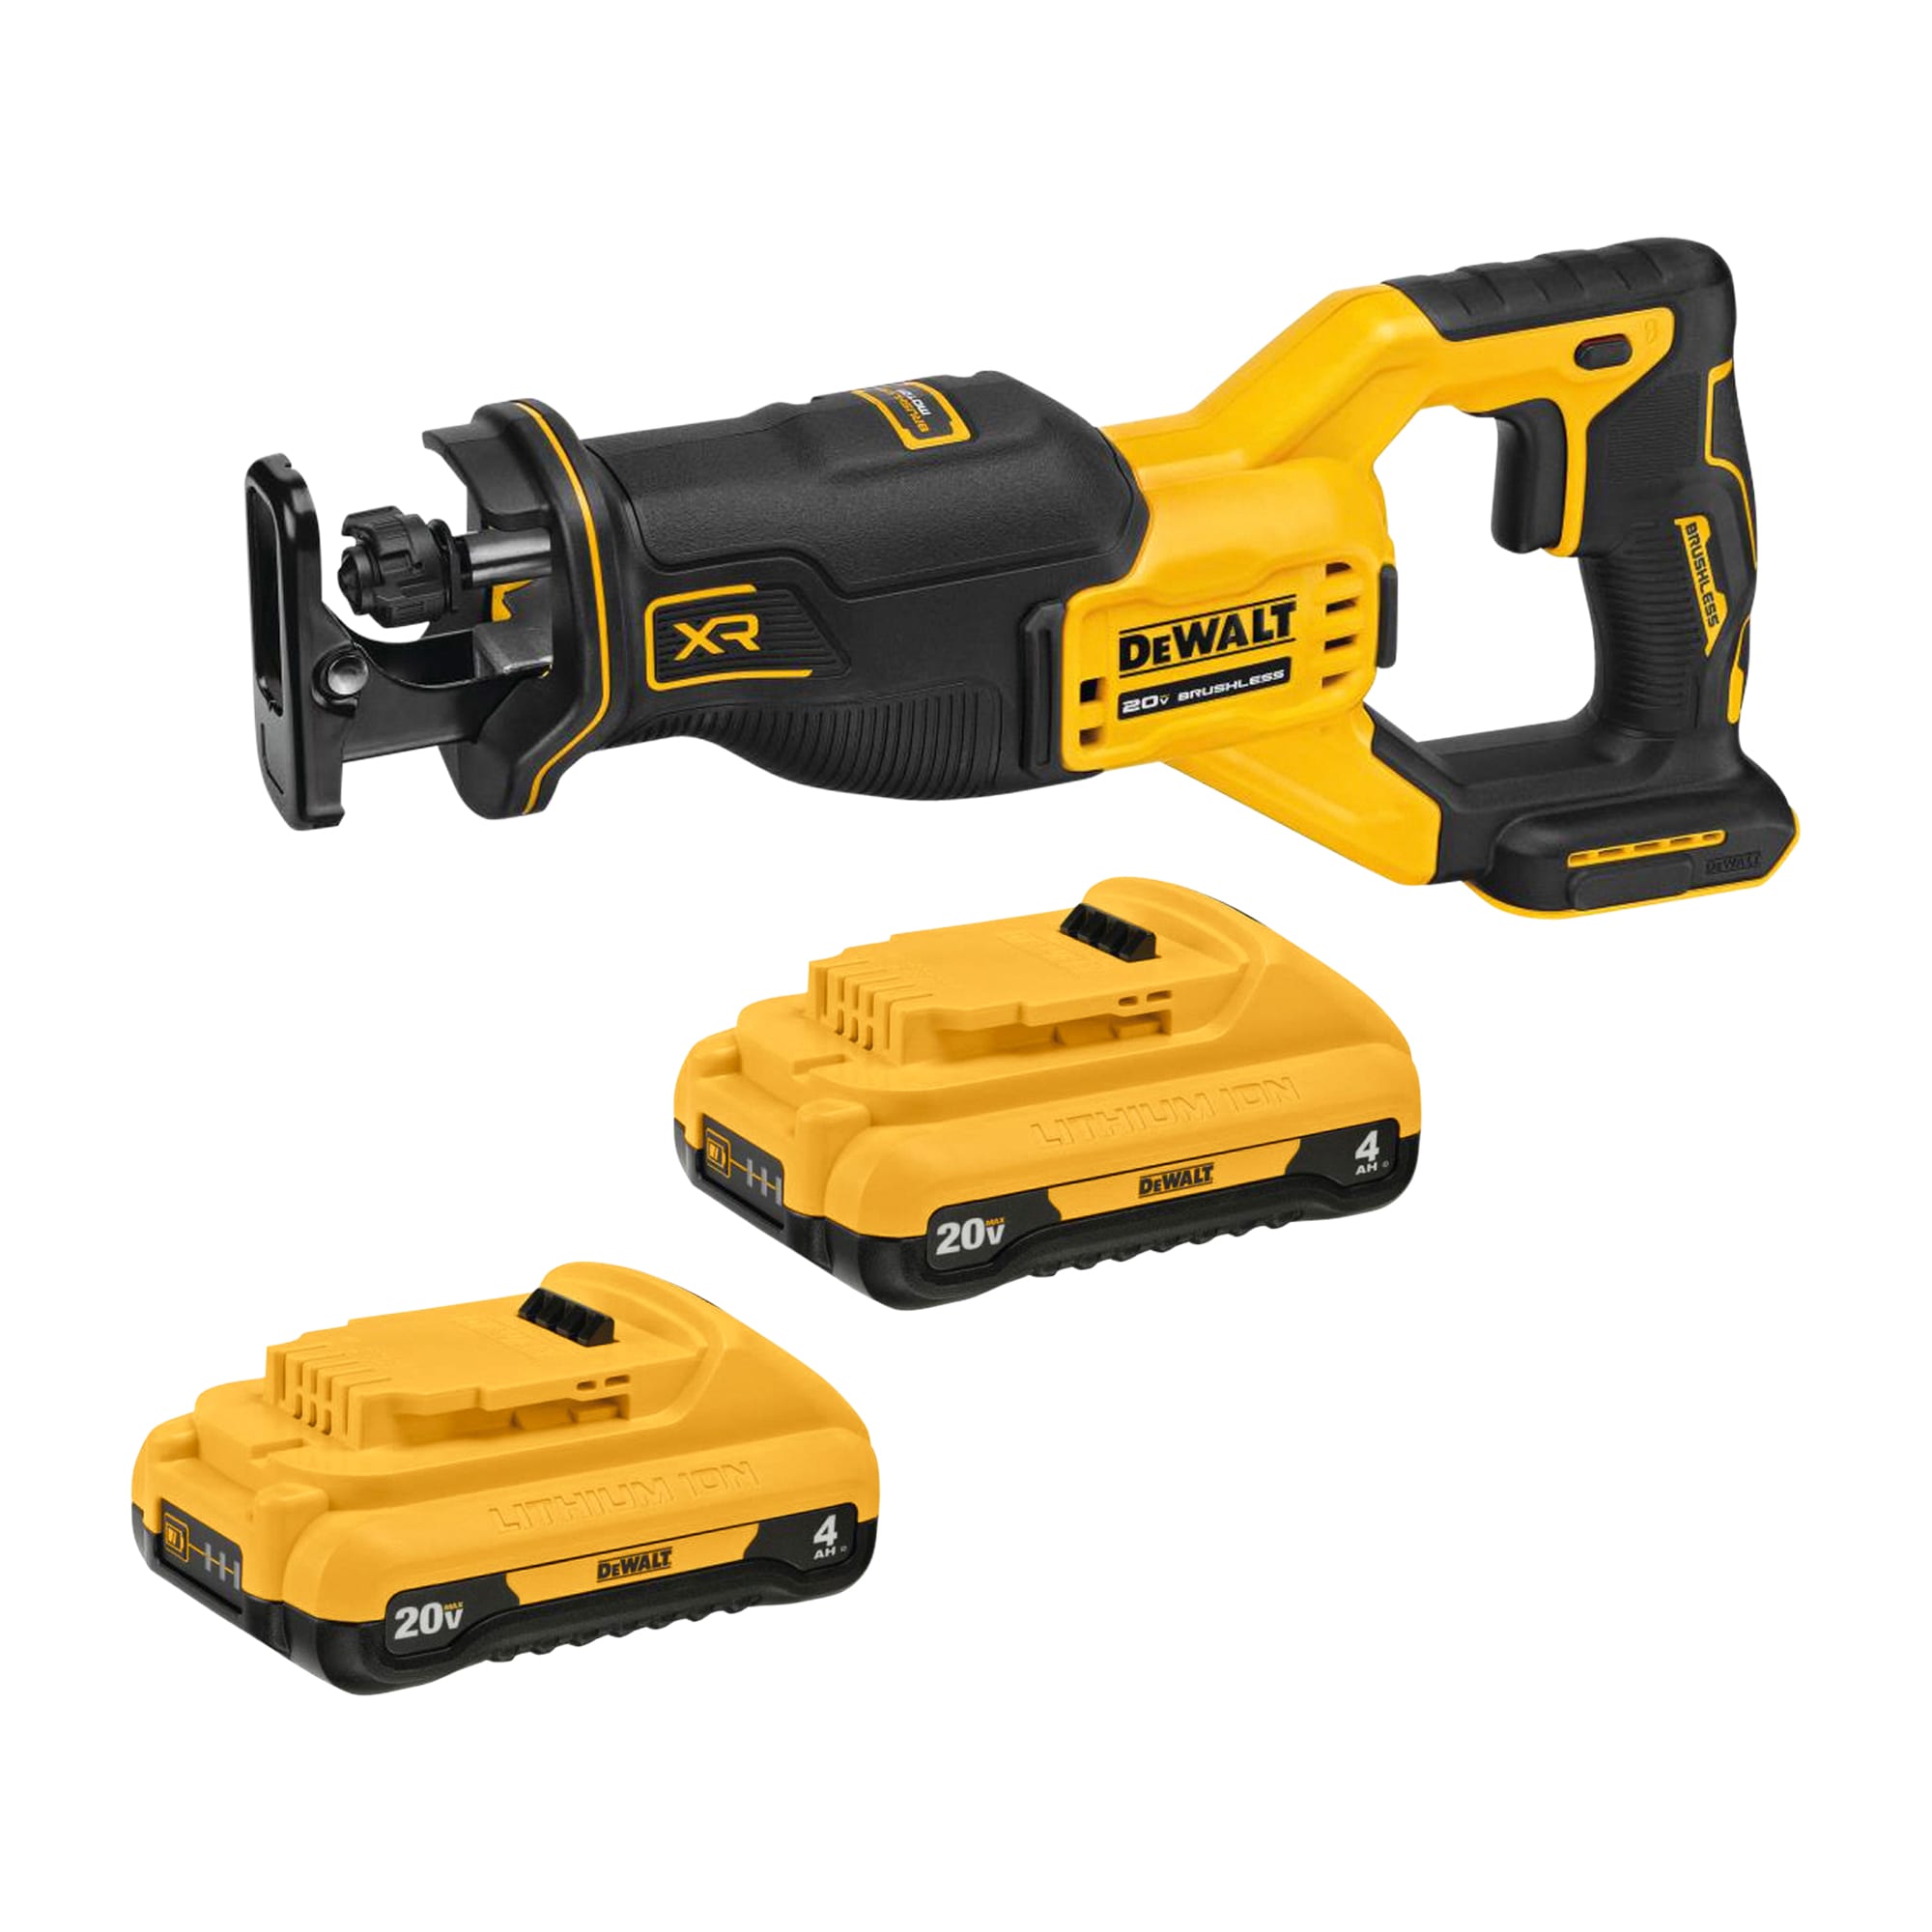 DEWALT XR 20-volt Max Variable Speed Brushless Cordless Reciprocating Saw (Tool Only) & 20-Volt Max 2-Pack 4 Amp-Hour Lithium Power Tool Battery